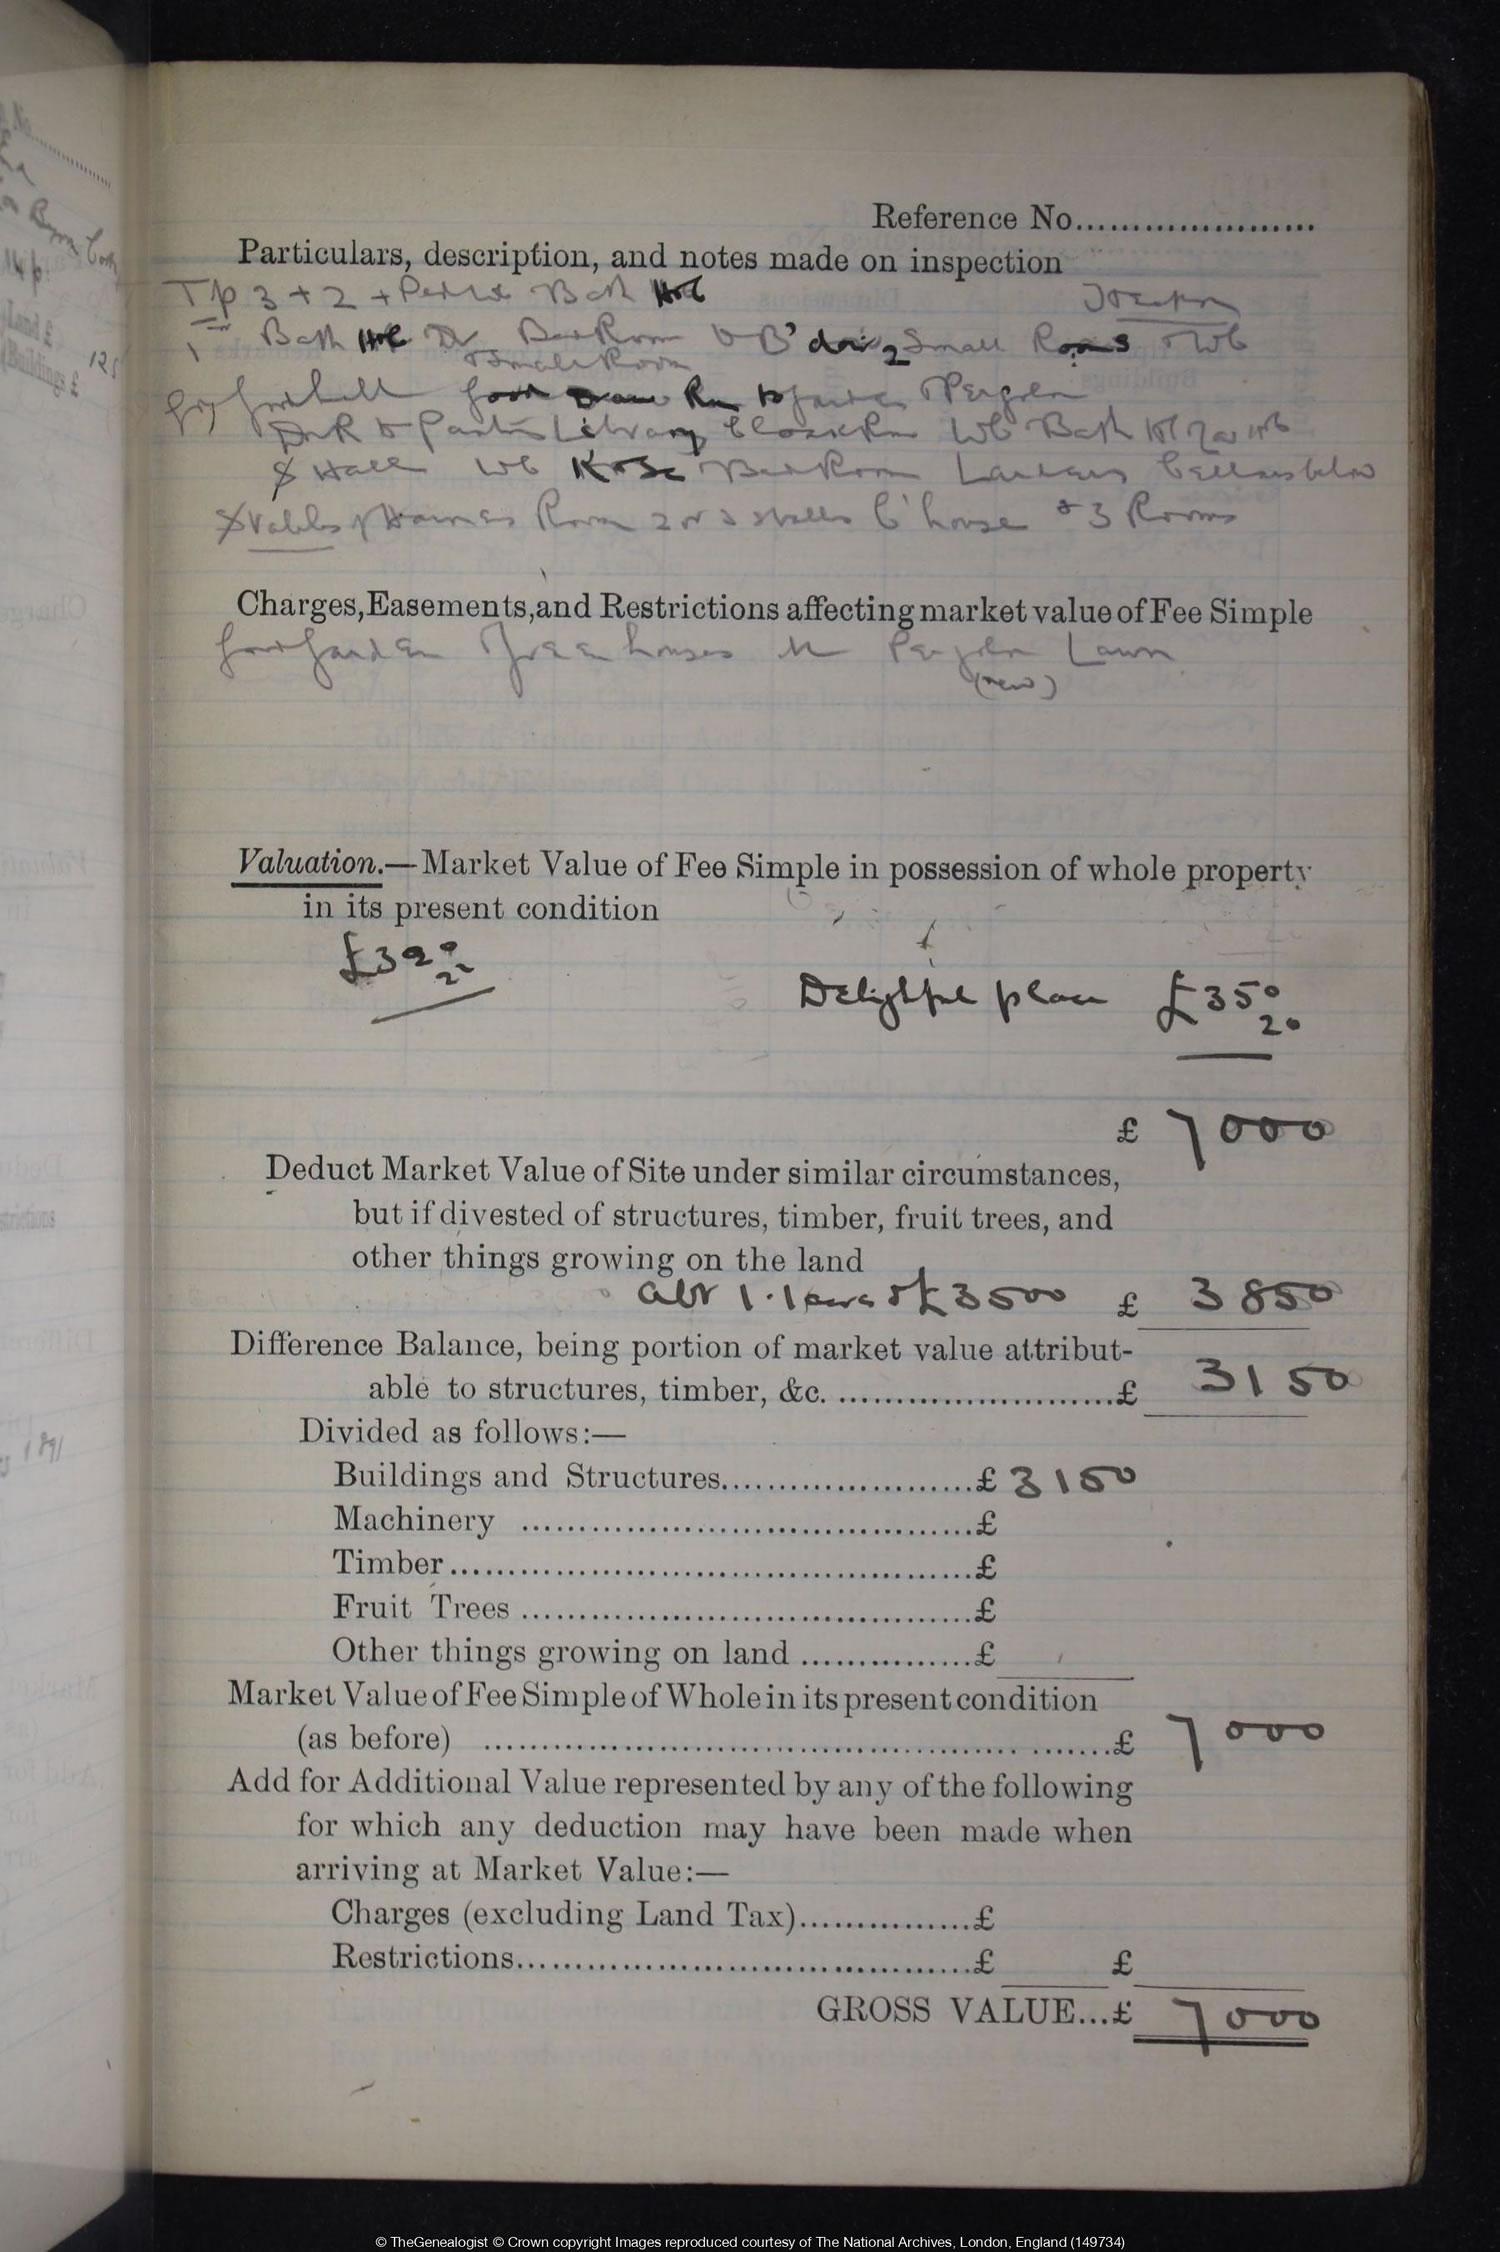 IR58 Field Books from TNA and digitised by TheGenealogist give details of each property